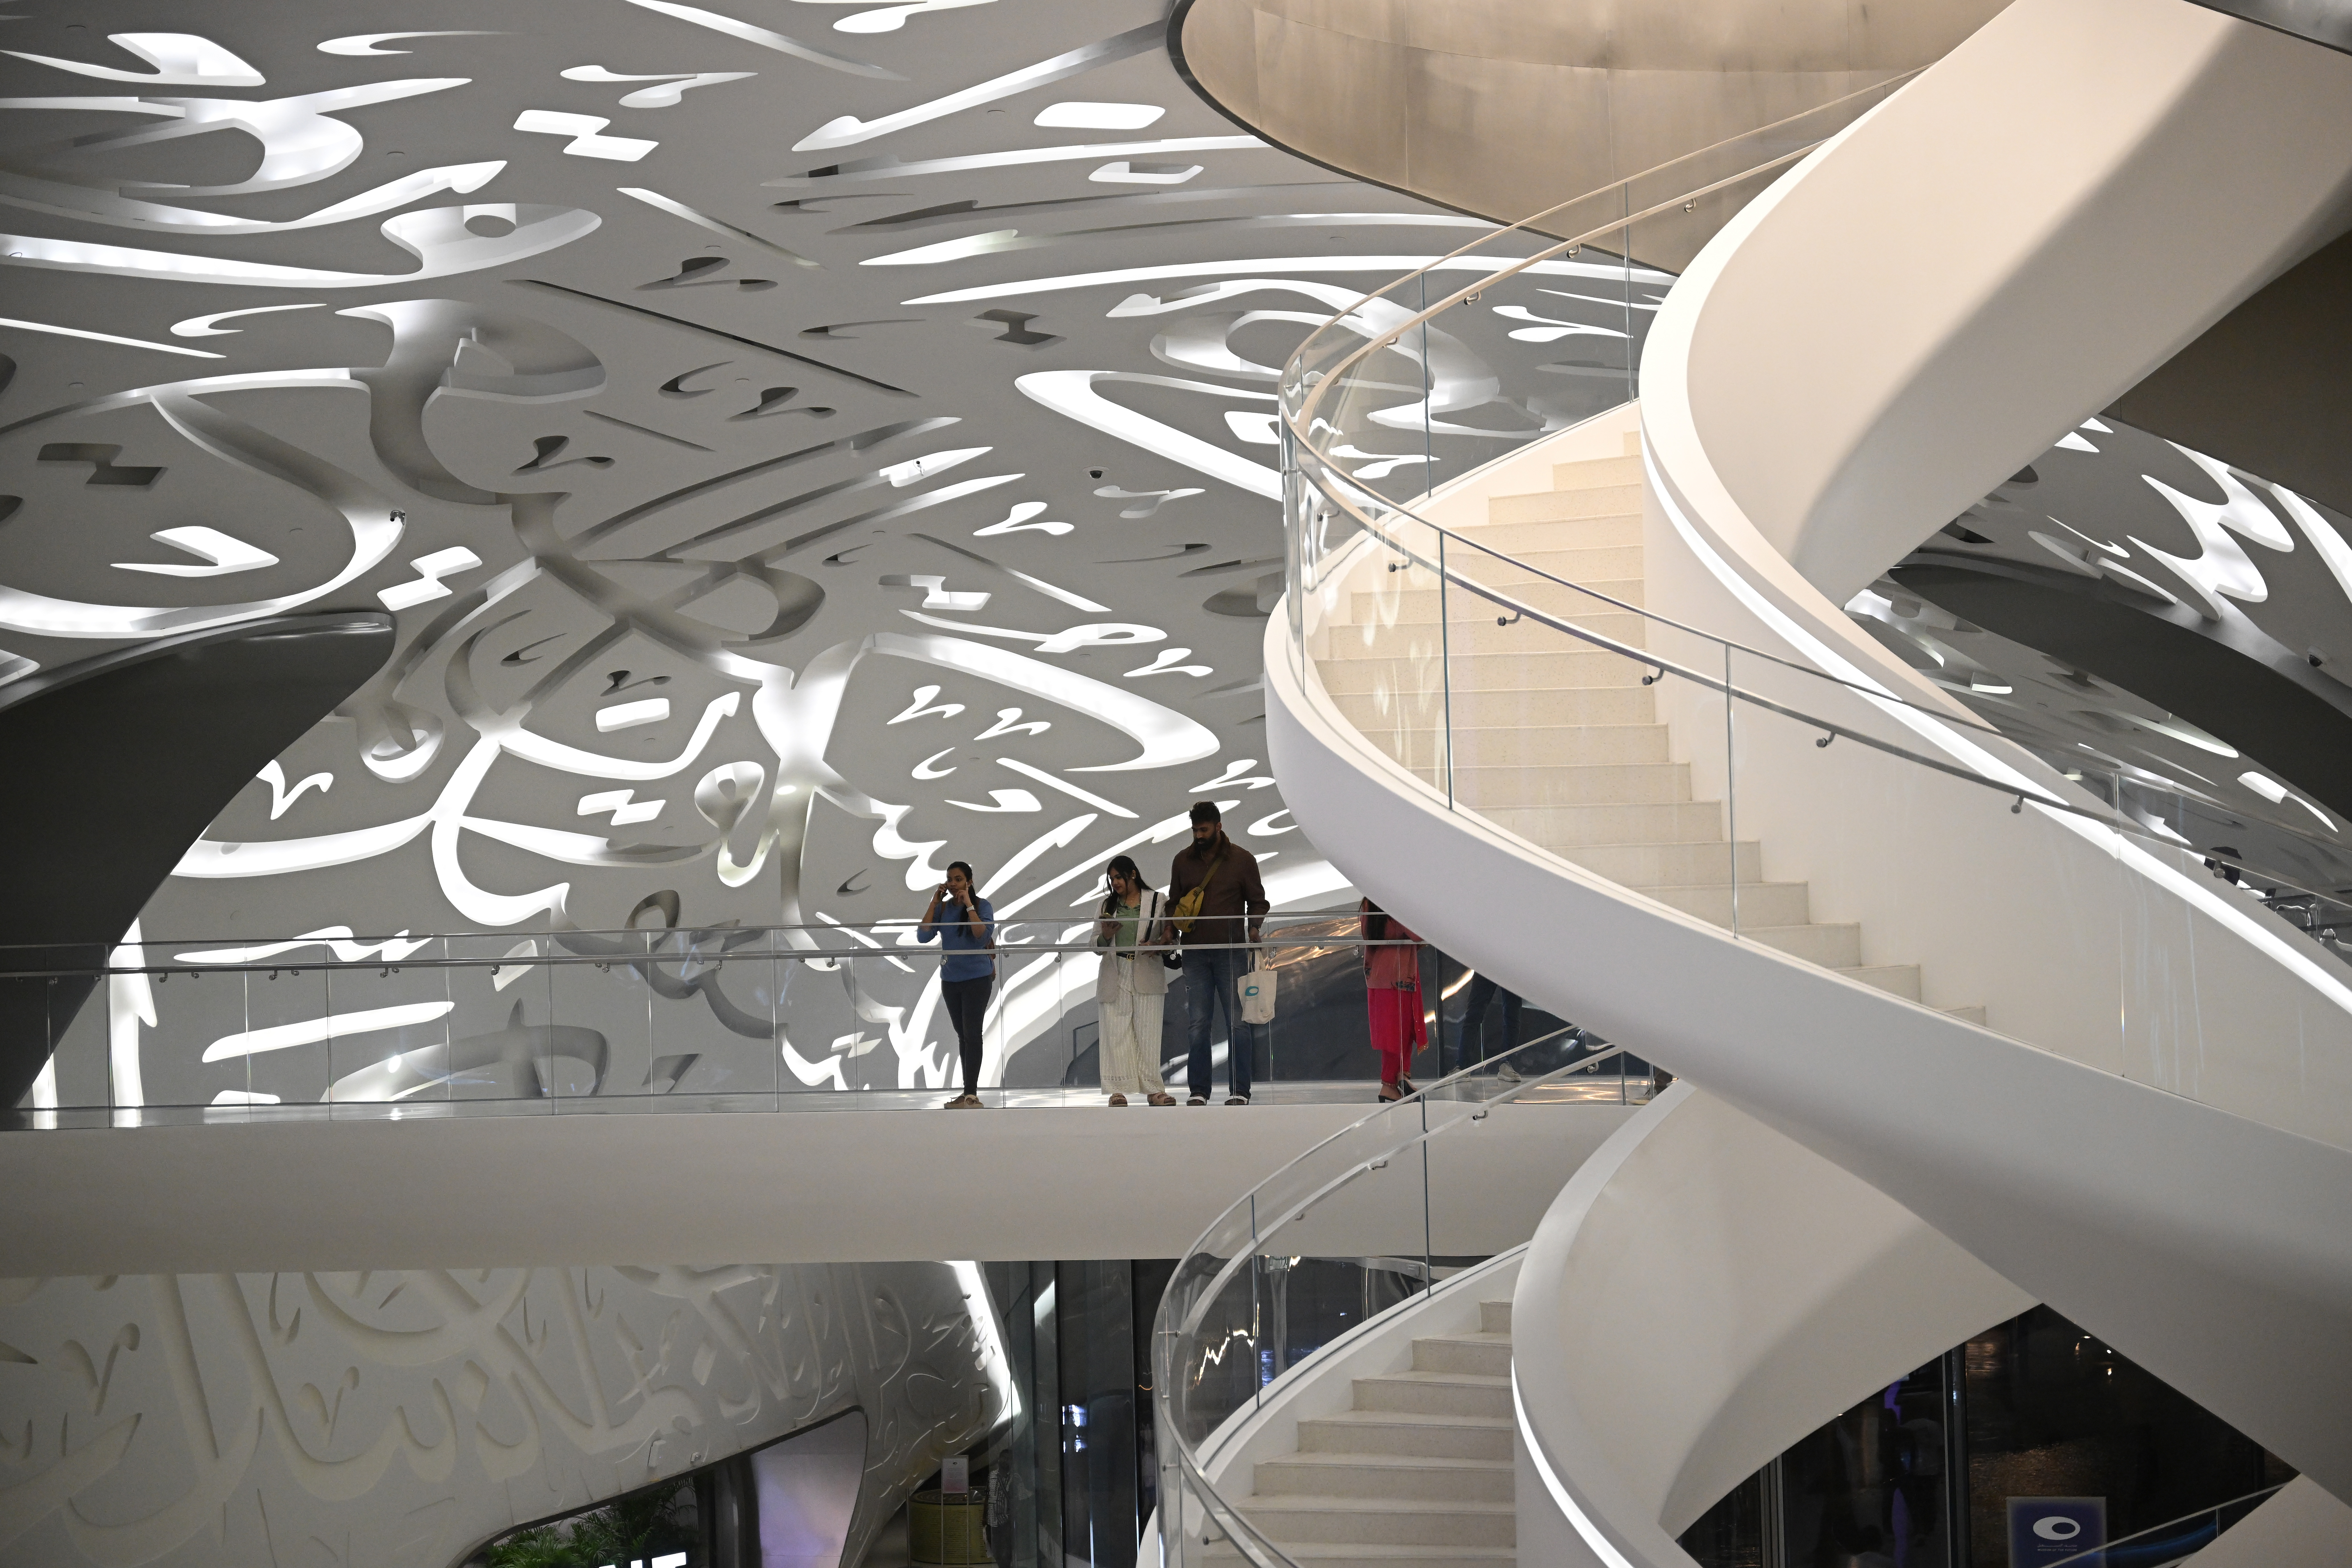 The Museum of the Future in Dubai. (Photo: Getty Images)